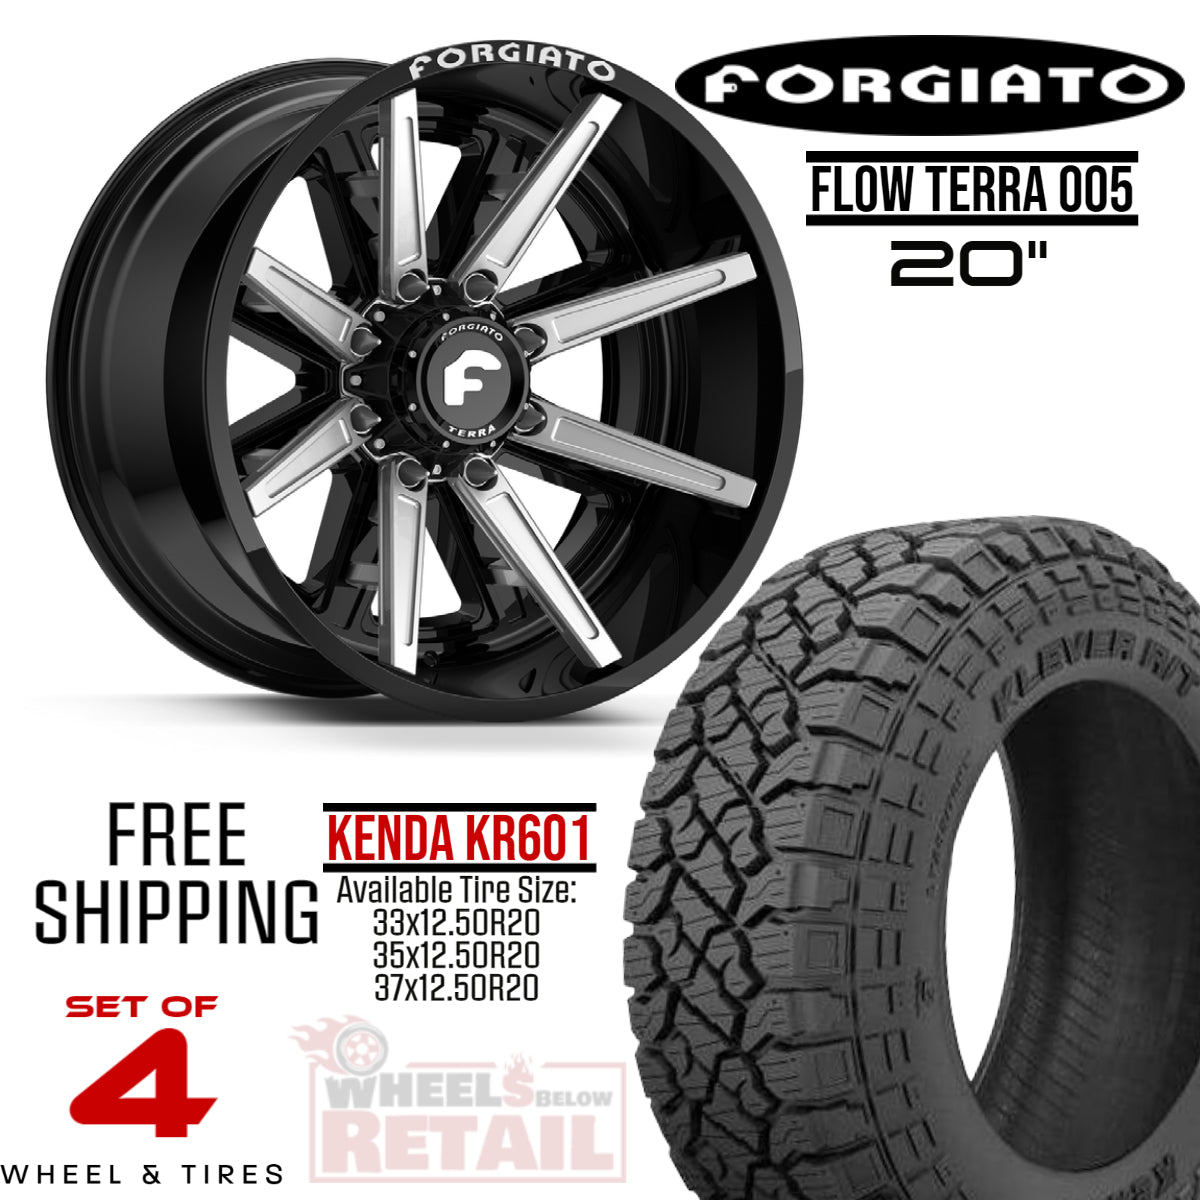 FORGIATO FLOW TERRA 005 20-INCH PACKAGE FOR FORD F150